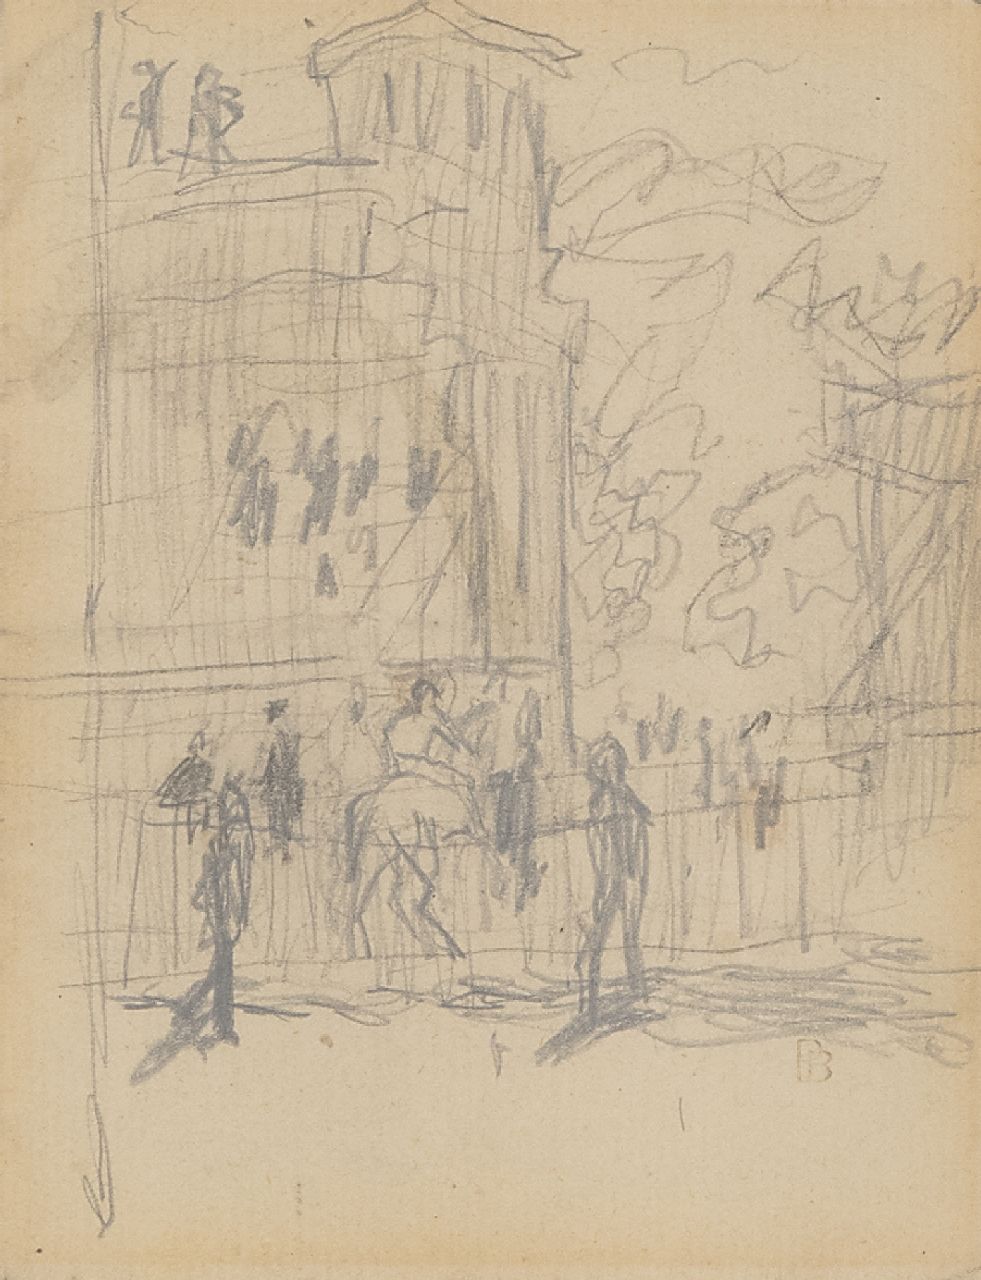 Bonnard P.E.F.  | 'Pierre' Eugène Frédéric Bonnard | Watercolours and drawings offered for sale | At the races, pencil on paper 11.0 x 8.5 cm, signed l.r. with stamp